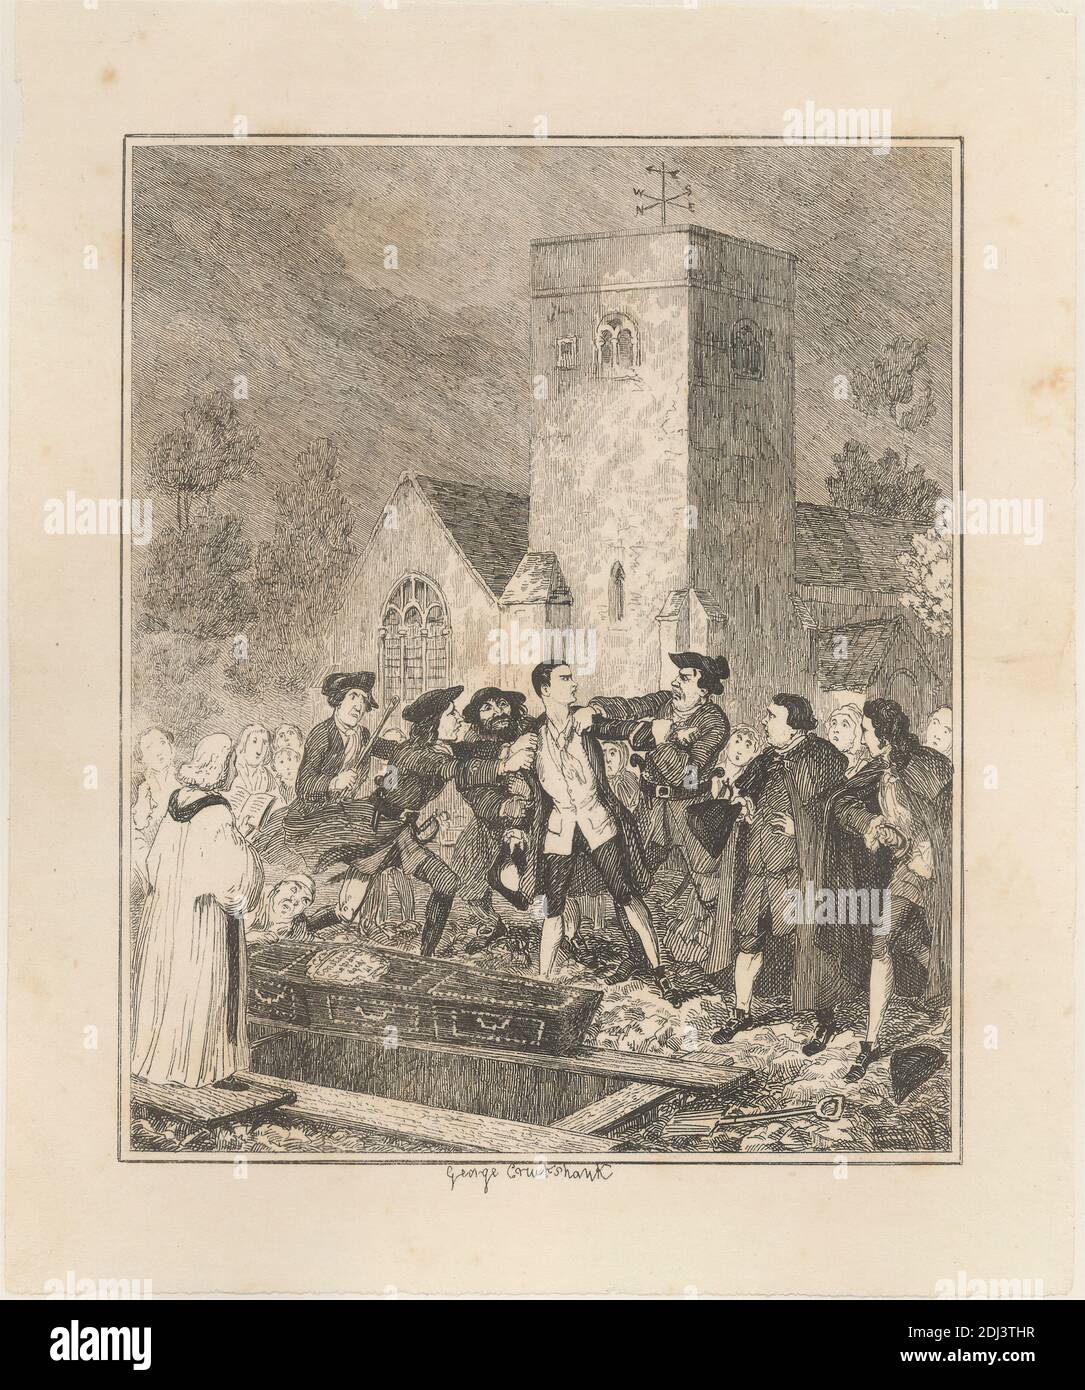 Jonathan Wild Seizing Jack Sheppard at his Mother's Grave in Willesden Church Yard, Print made by George Cruikshank, 1792–1878, British, 1839, Etching on moderately thick, smooth, cream wove paper with beige chine collé, Sheet: 8 7/16 x 7 5/16 inches (21.5 x 18.6 cm), Plate: 6 15/16 x 5 7/8 inches (17.7 x 15 cm), Sheet: 5 15/16 x 4 15/16 inches (15.1 x 12.5 cm), and Image: 4 5/8 x 3 3/4 inches (11.7 x 9.6 cm), angry, Chapter 26 - 'How Jack Sheppard Attended his Mother's Funeral', church, coffin, criminals, crowd, Epoch the Second: 'Thames Darrell.', funeral, gesturing, grave, graveyard Stock Photo